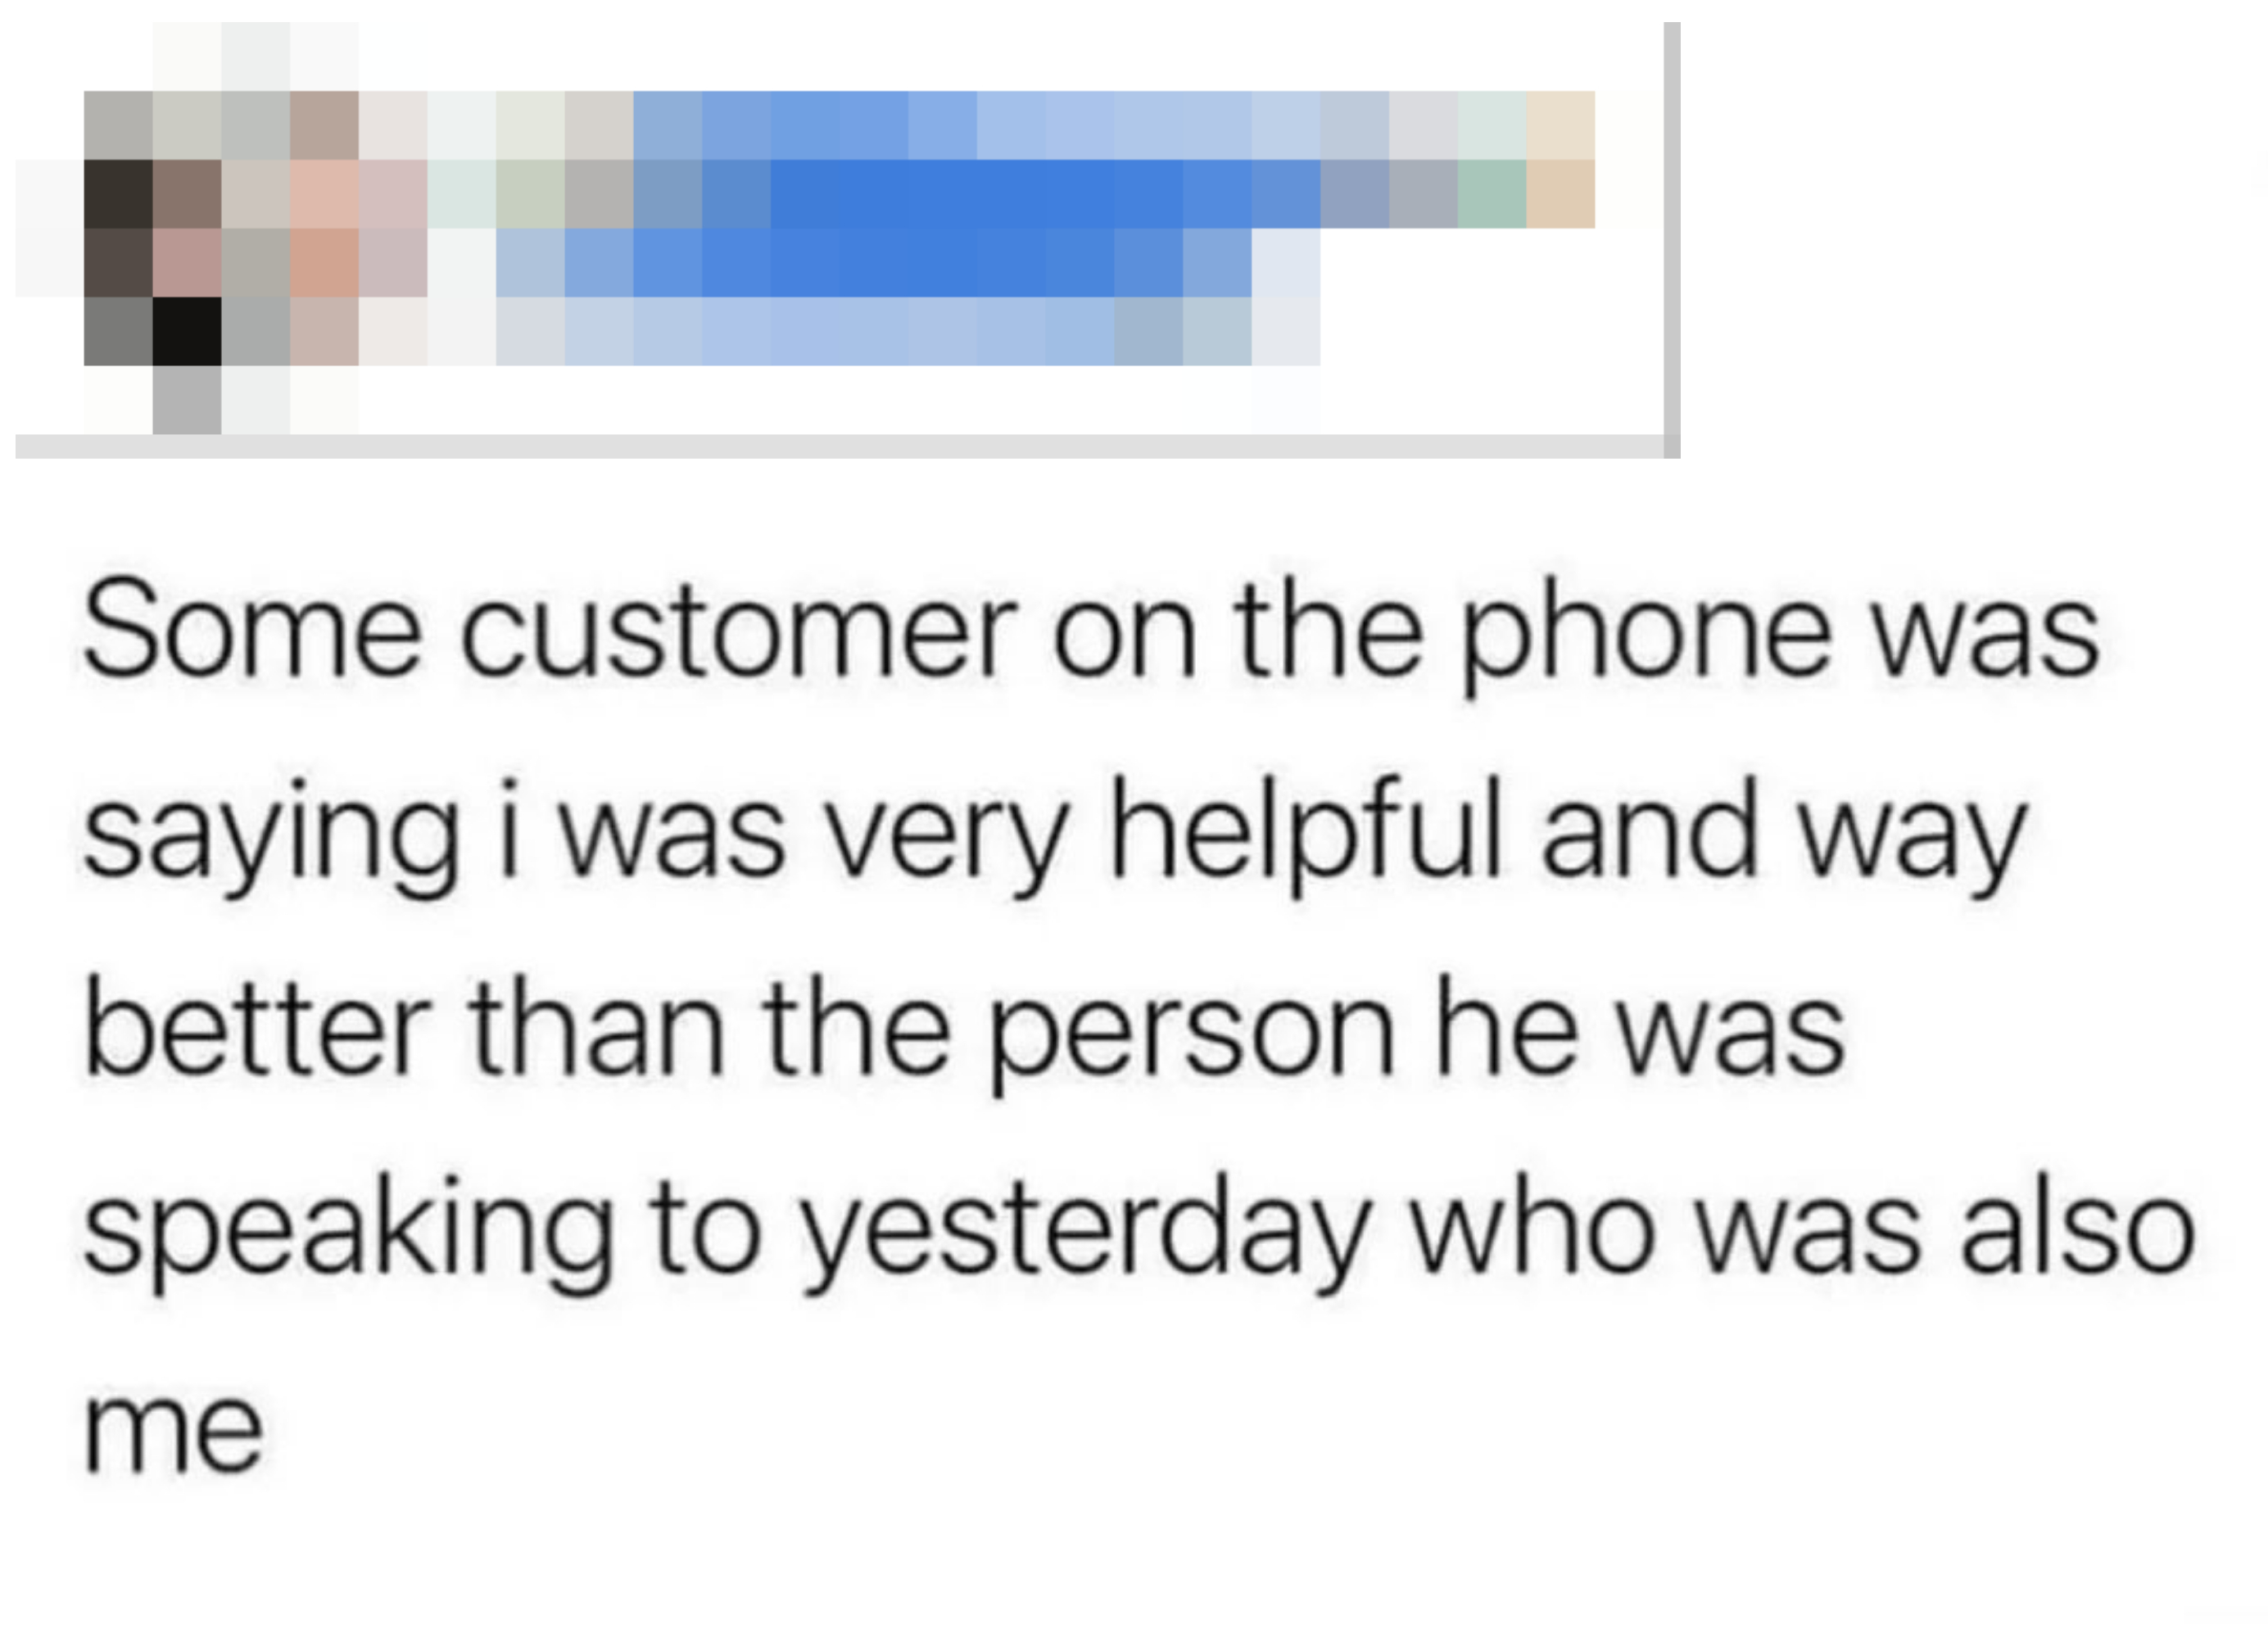 &quot;Some customer on the phone was saying i was very helpful and way better than the person he was speaking to yesterday who was also me&quot;